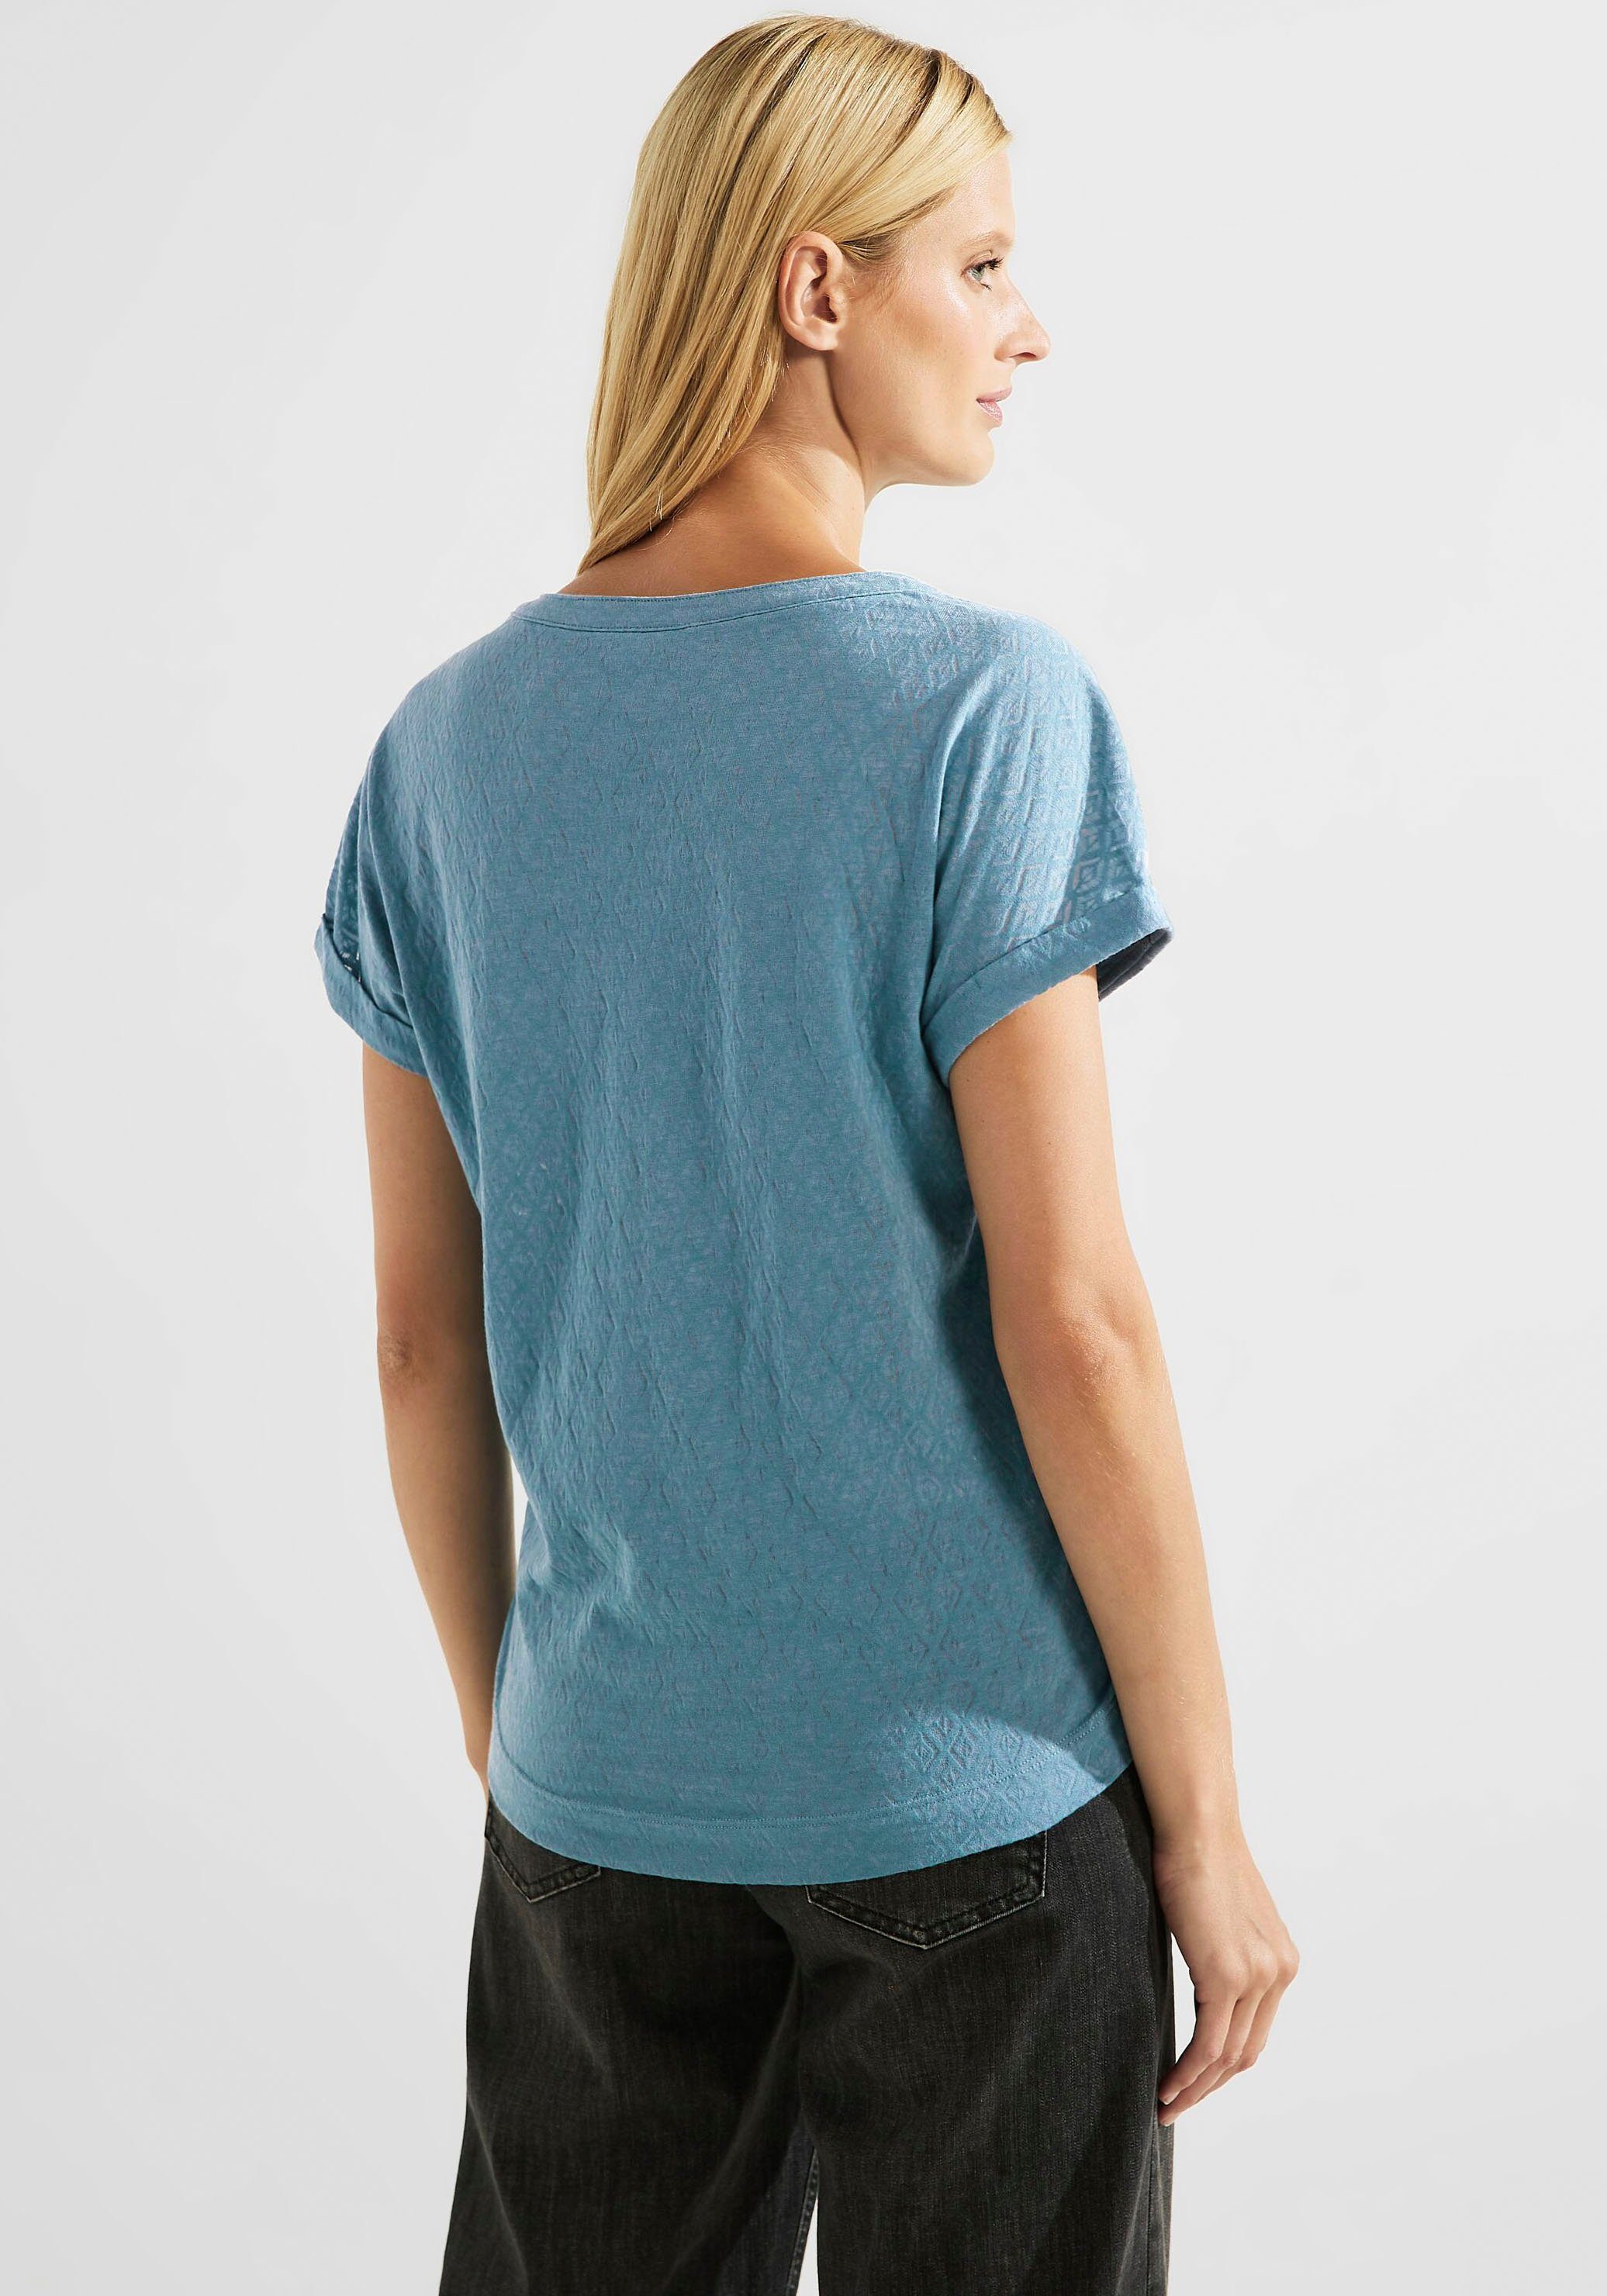 Allover-Muster in adriatic Cecil blue mit Rhombusform T-Shirt